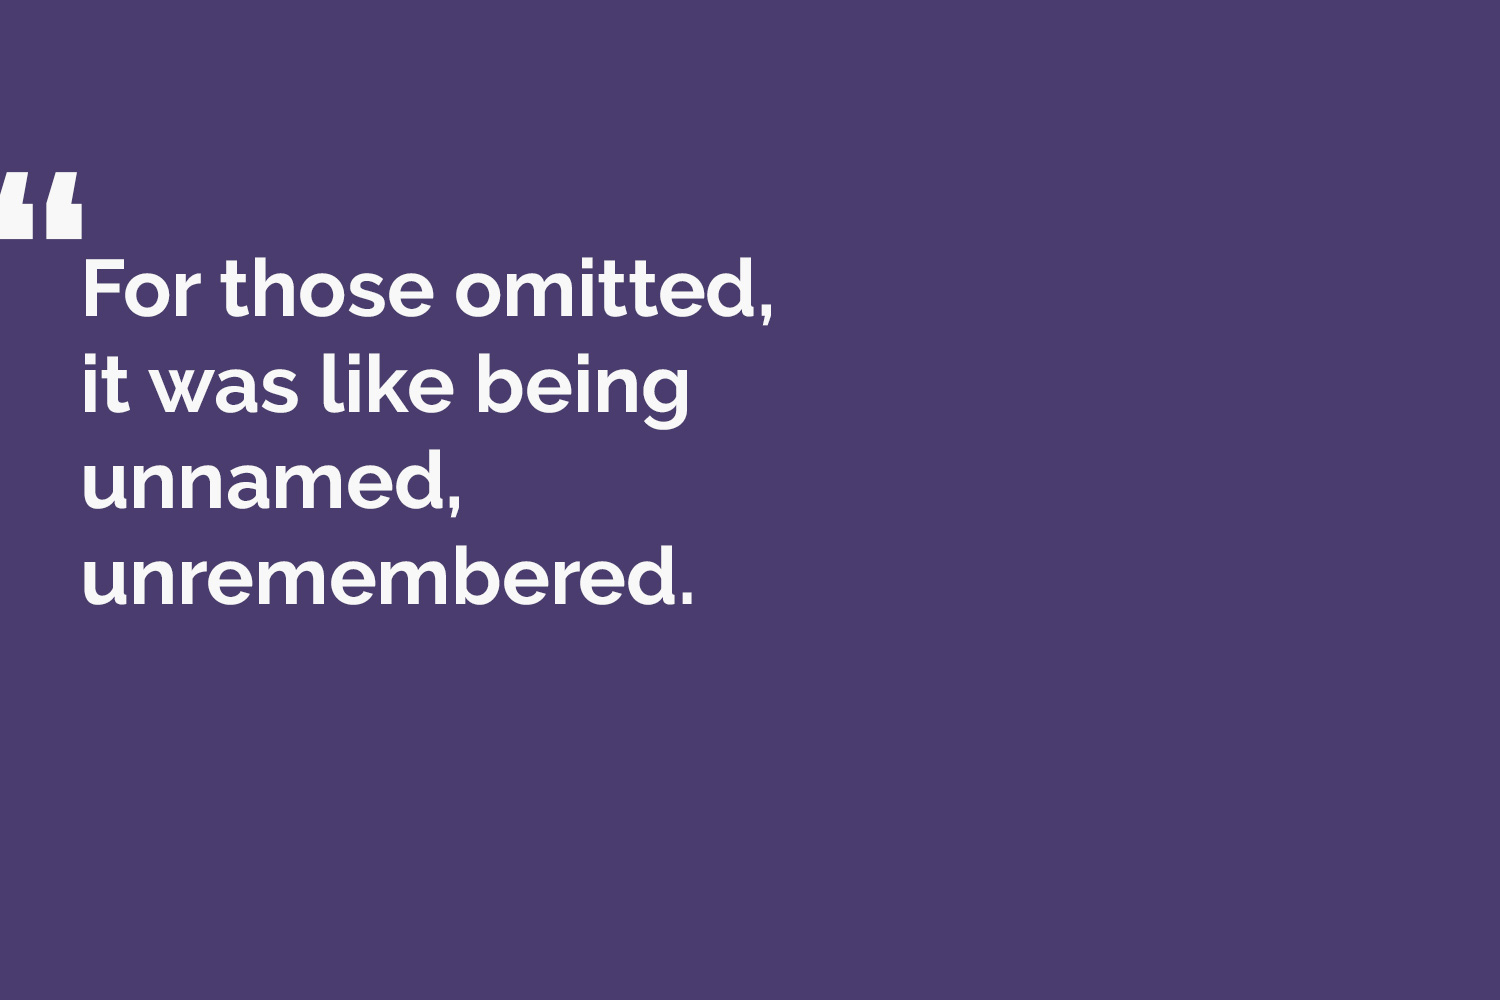 quote card reads: For those omotted, it was like being unnamed, unremembered.